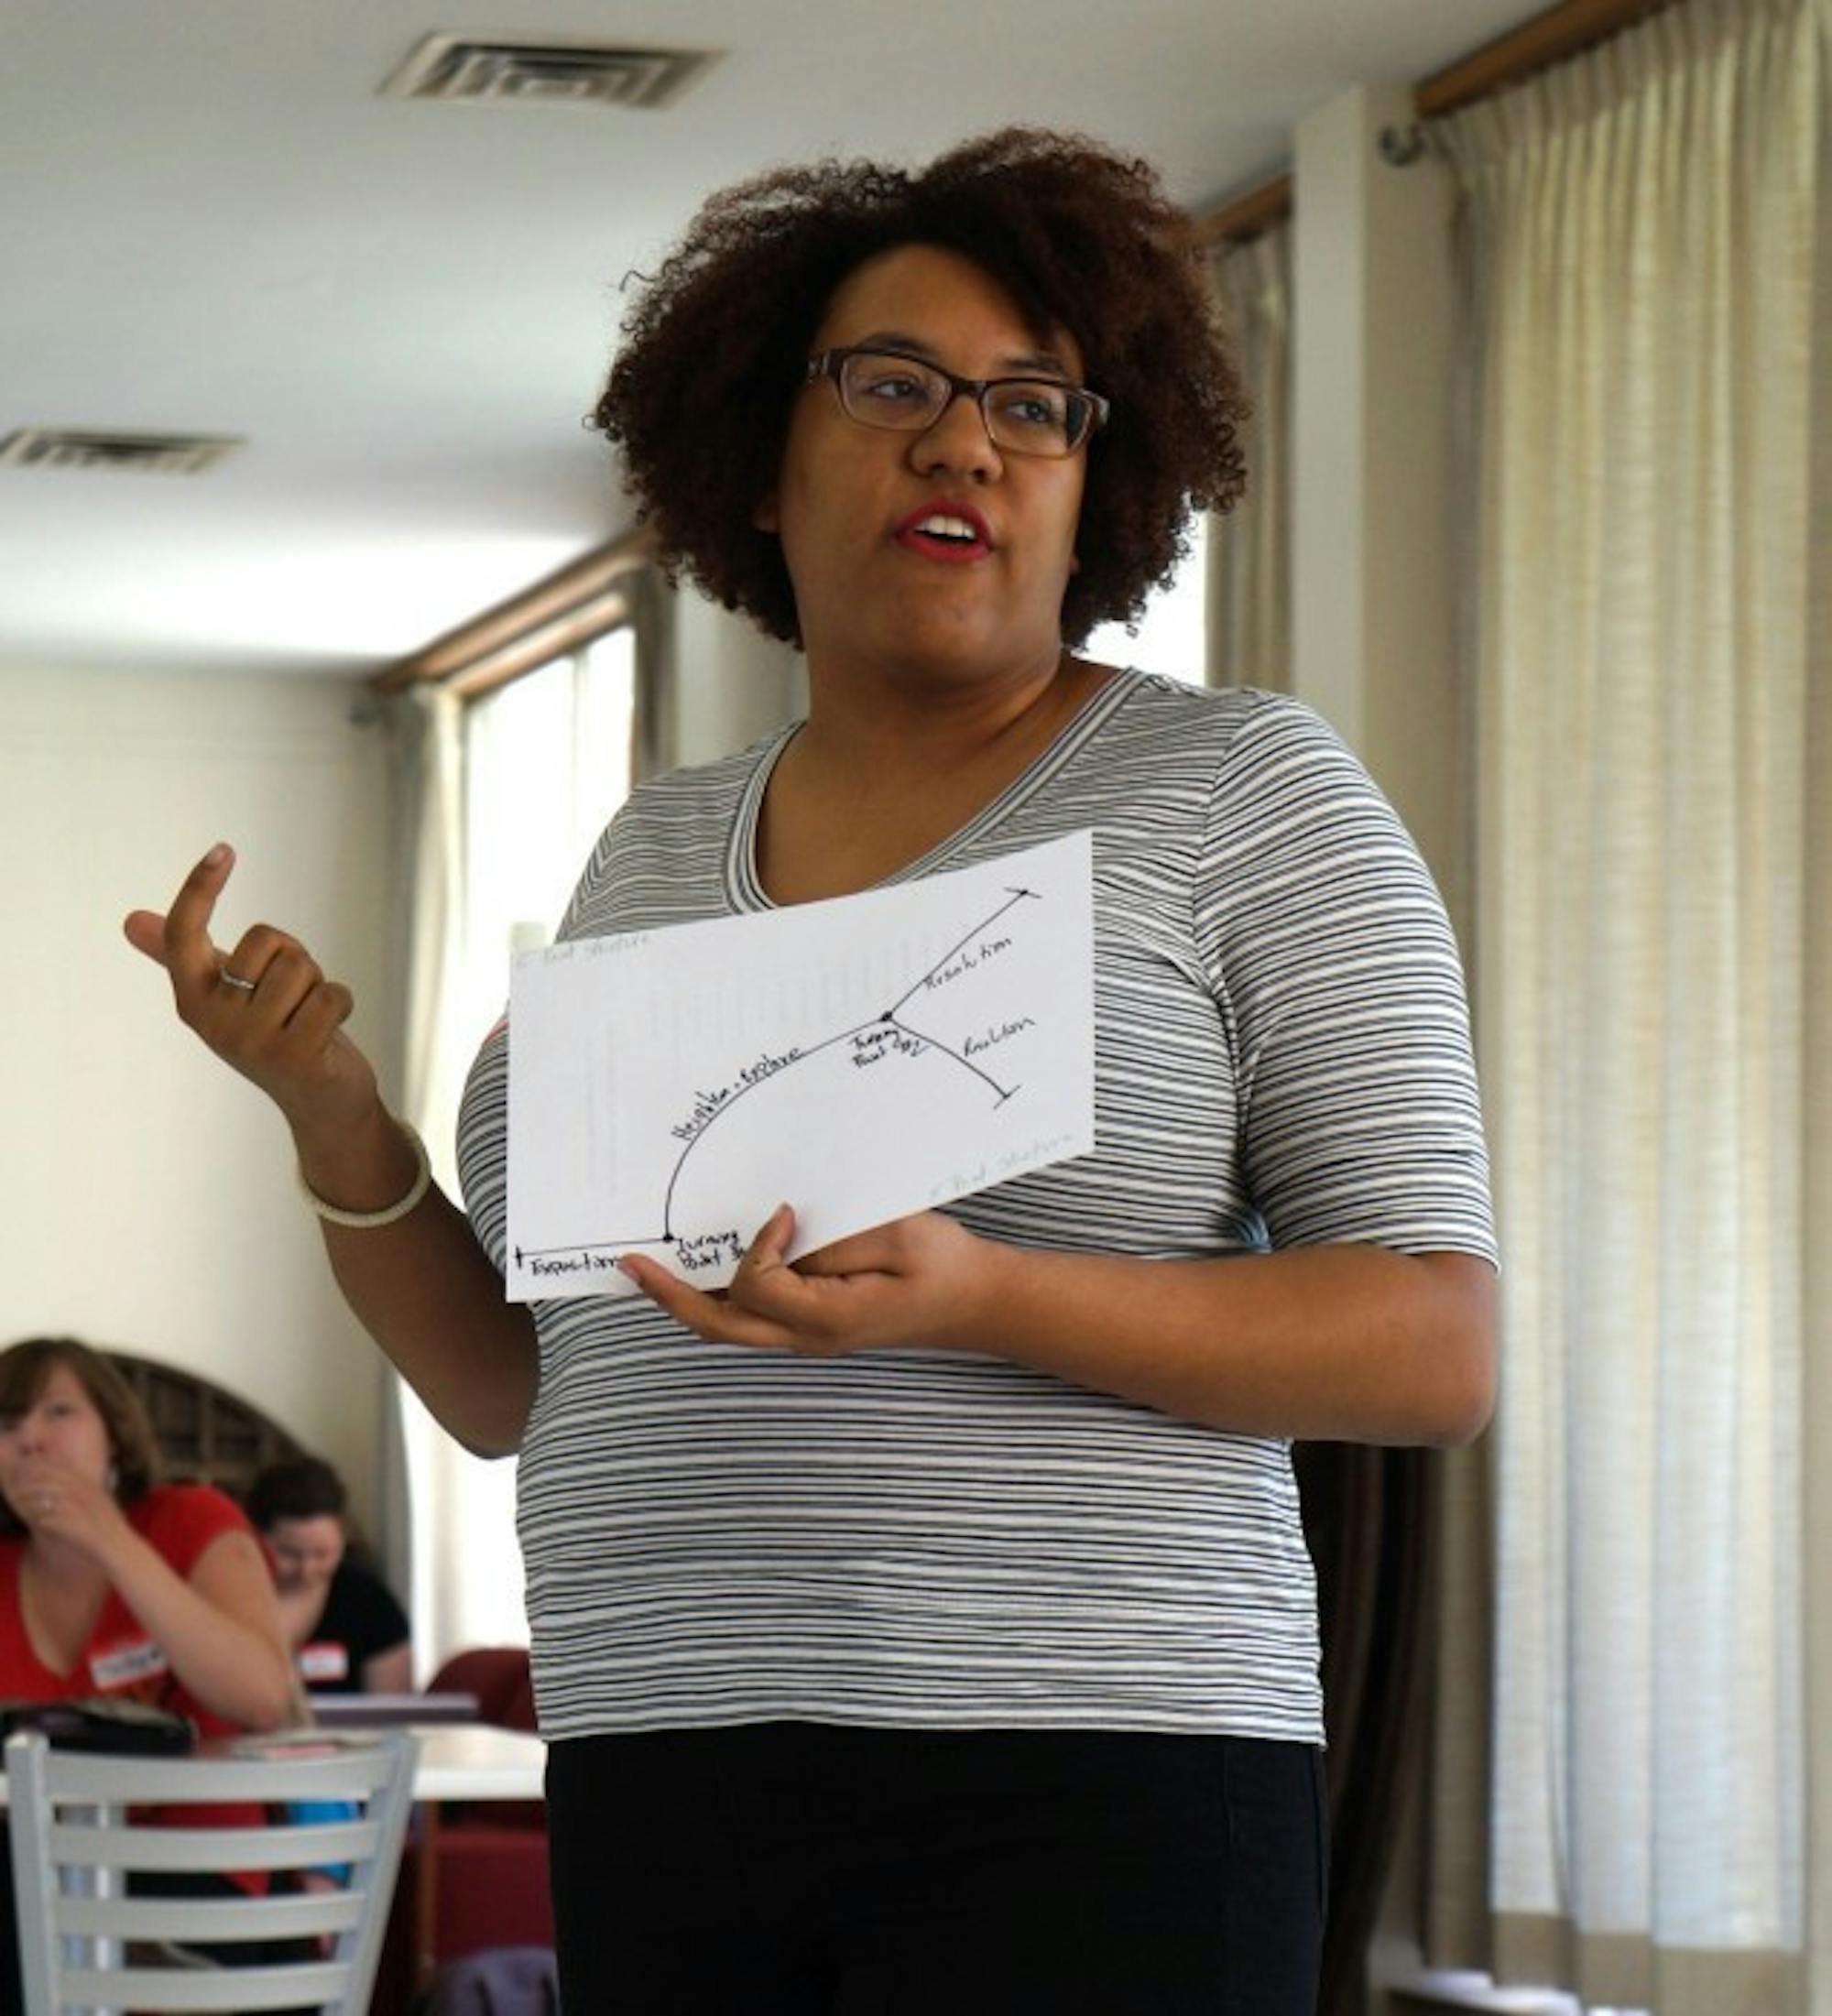 A member of the Second City, Ali Barthwell, instructs a workshop in the Regina South Lounge on Sunday afternoon.